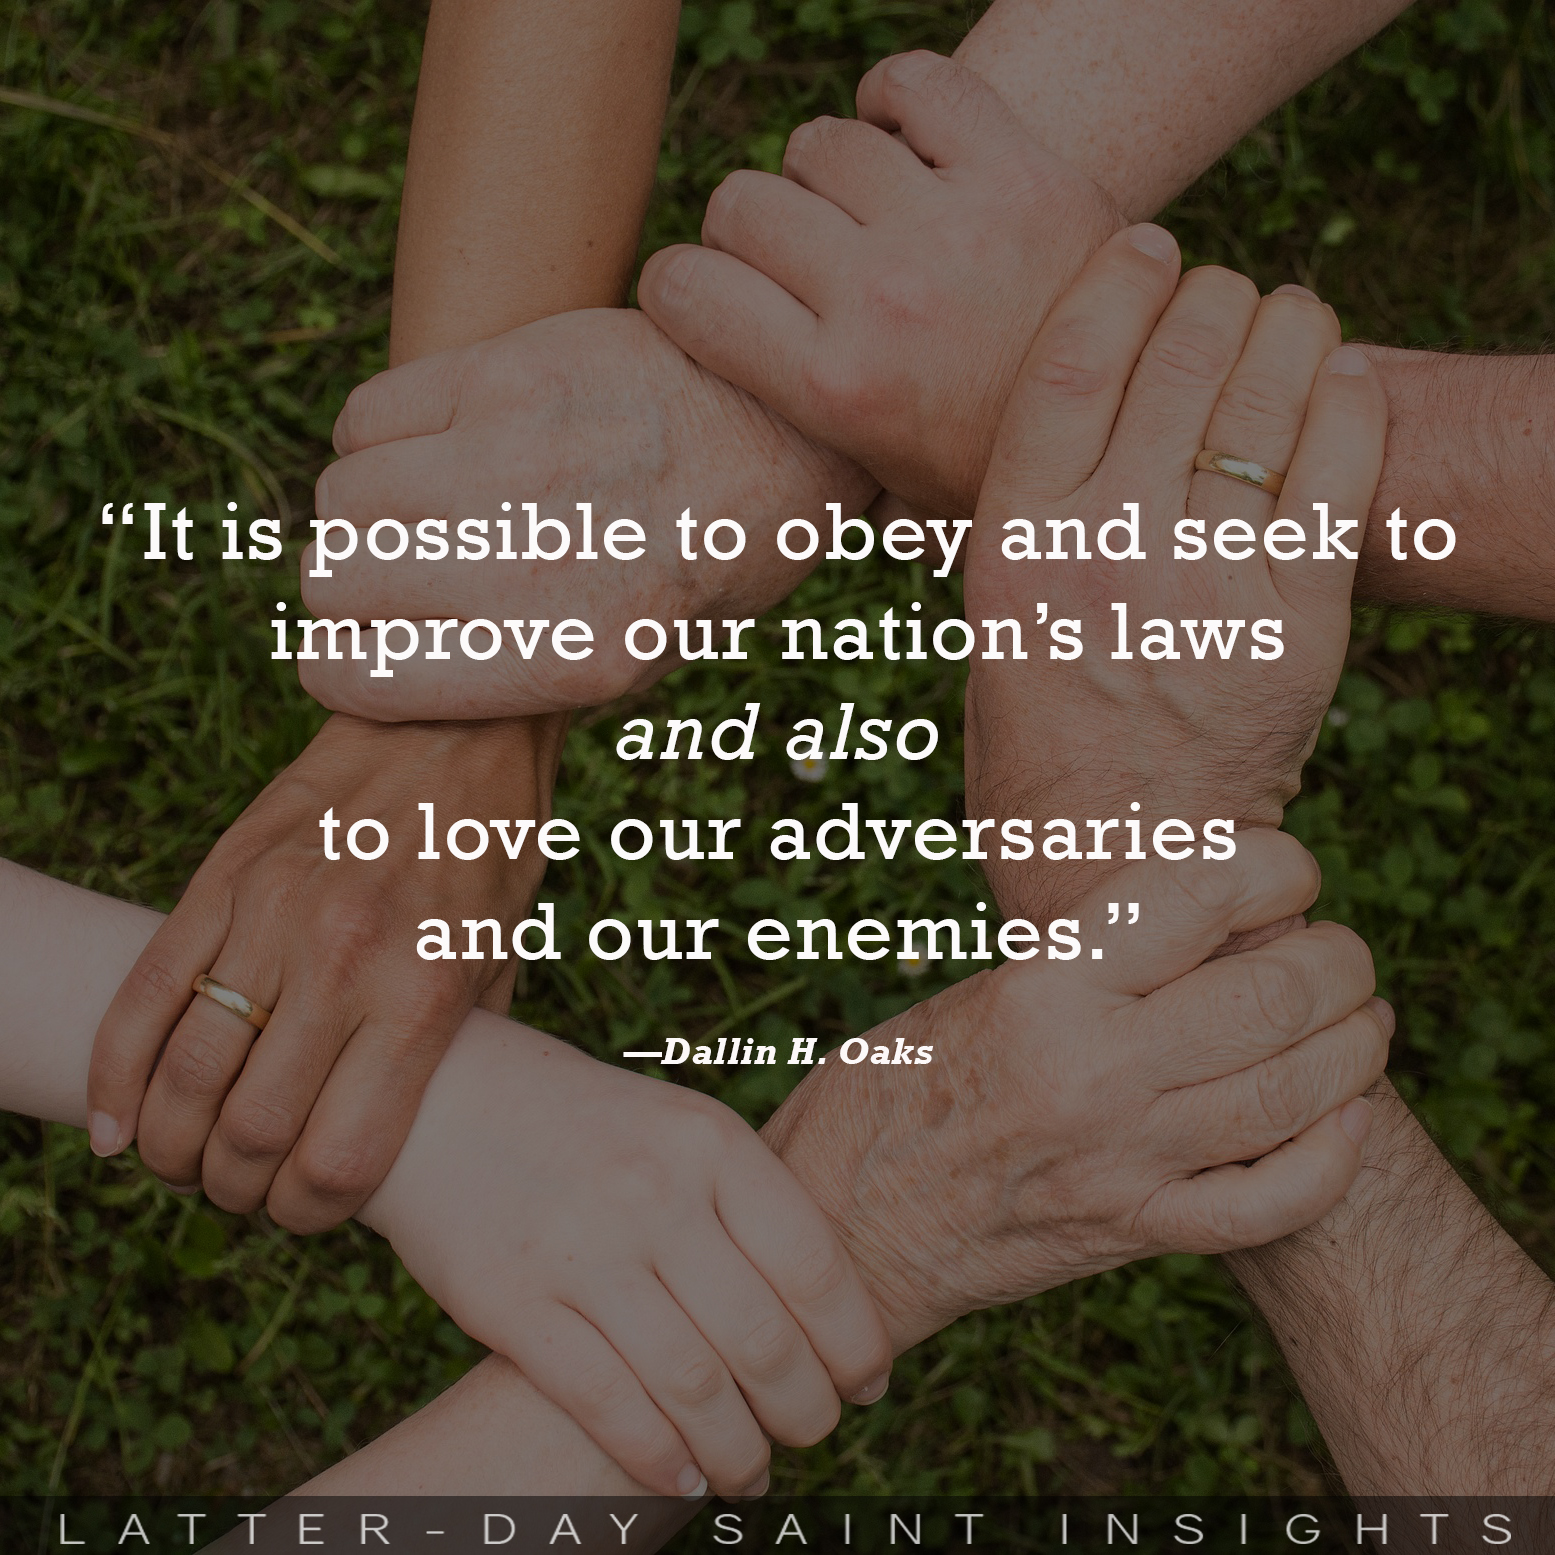 "It is possible to obey and seek to improve our nation's laws and also to love our adversaries and our enemies." -Dallin H. Oaks